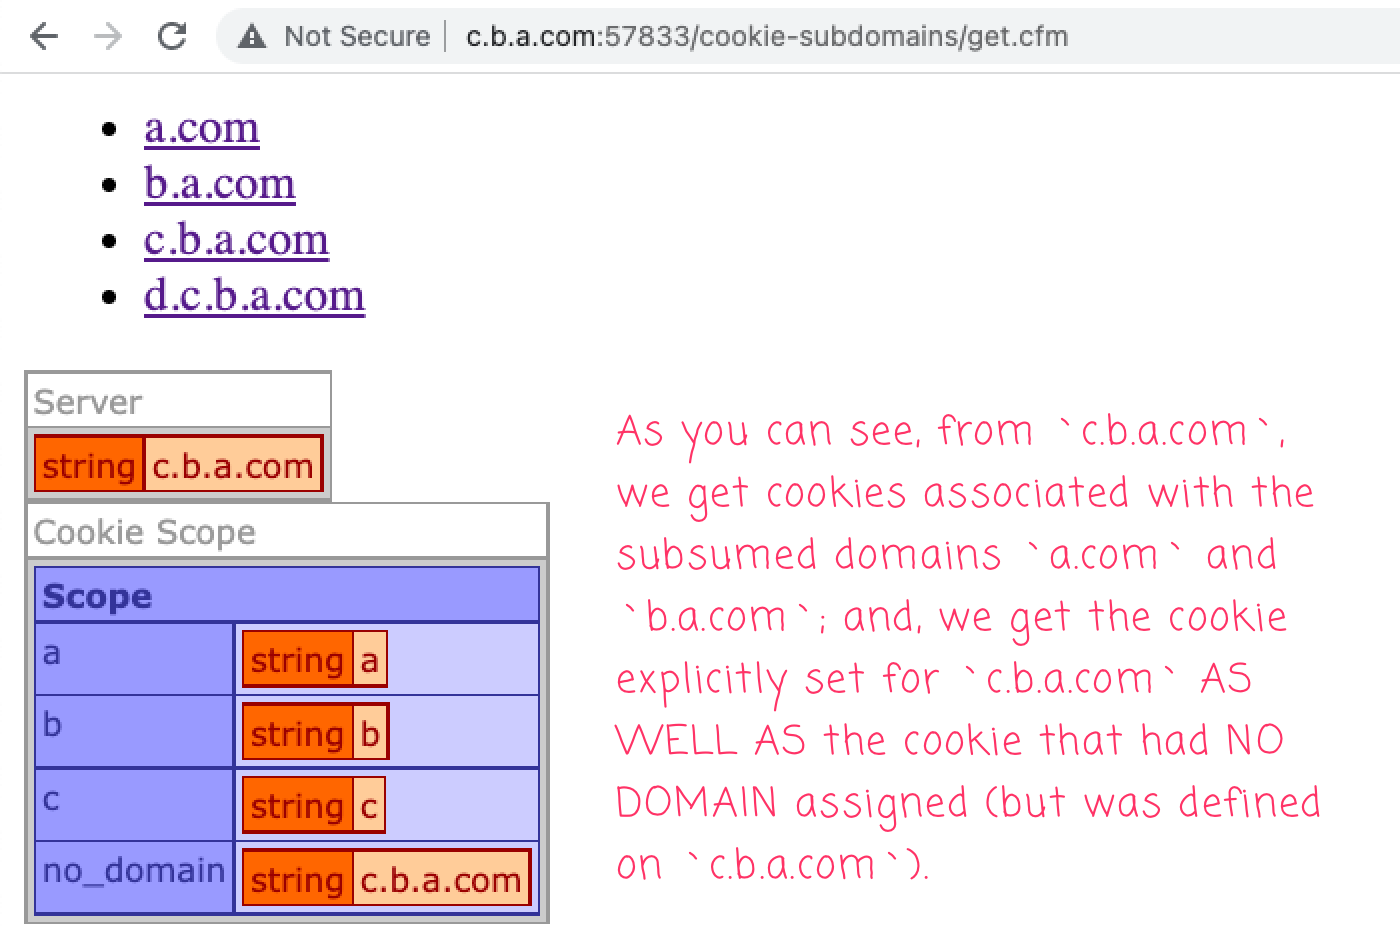 Access cookies on 'c.b.a.com' provides cookies associated with the subsumed domains, 'a.com' and 'b.a.com', as well as the cookies associated with 'c.b.a.com'.